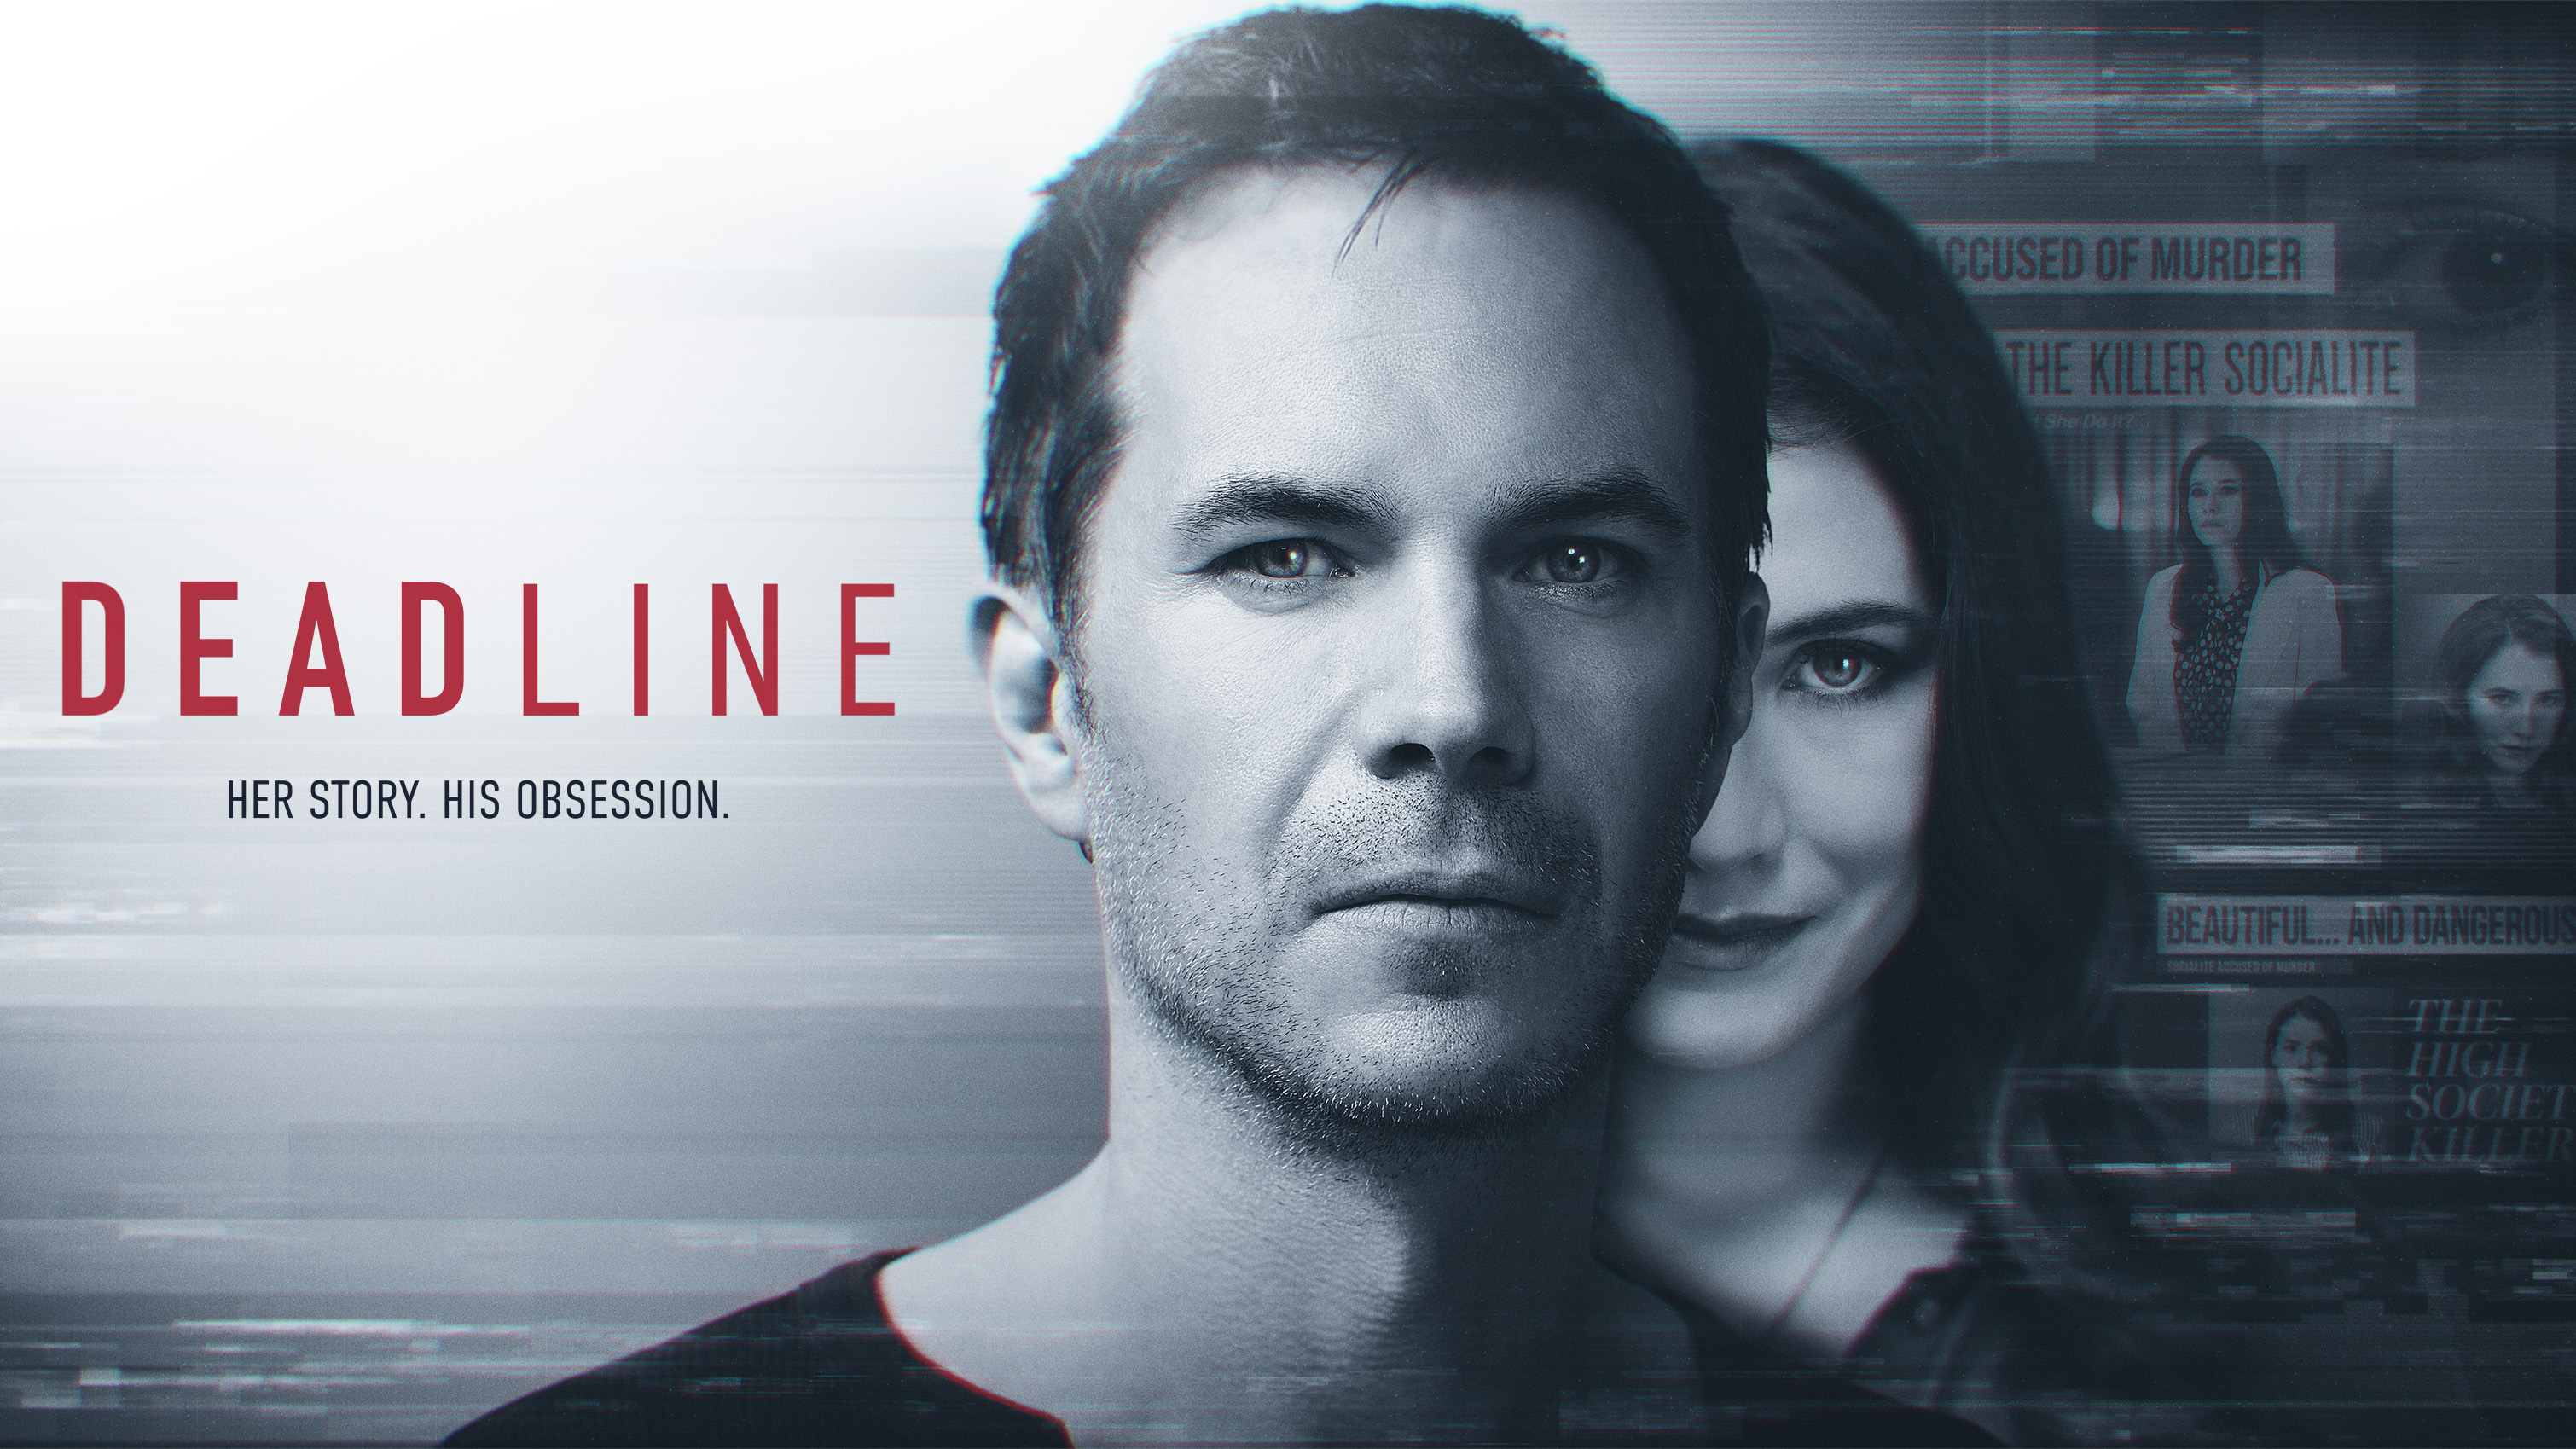 Watch the promo for DEADLINE - When Natalie Varga stands accused of murdering her husband, disgraced investigative journalist James Alden finds himself captivated by the case.